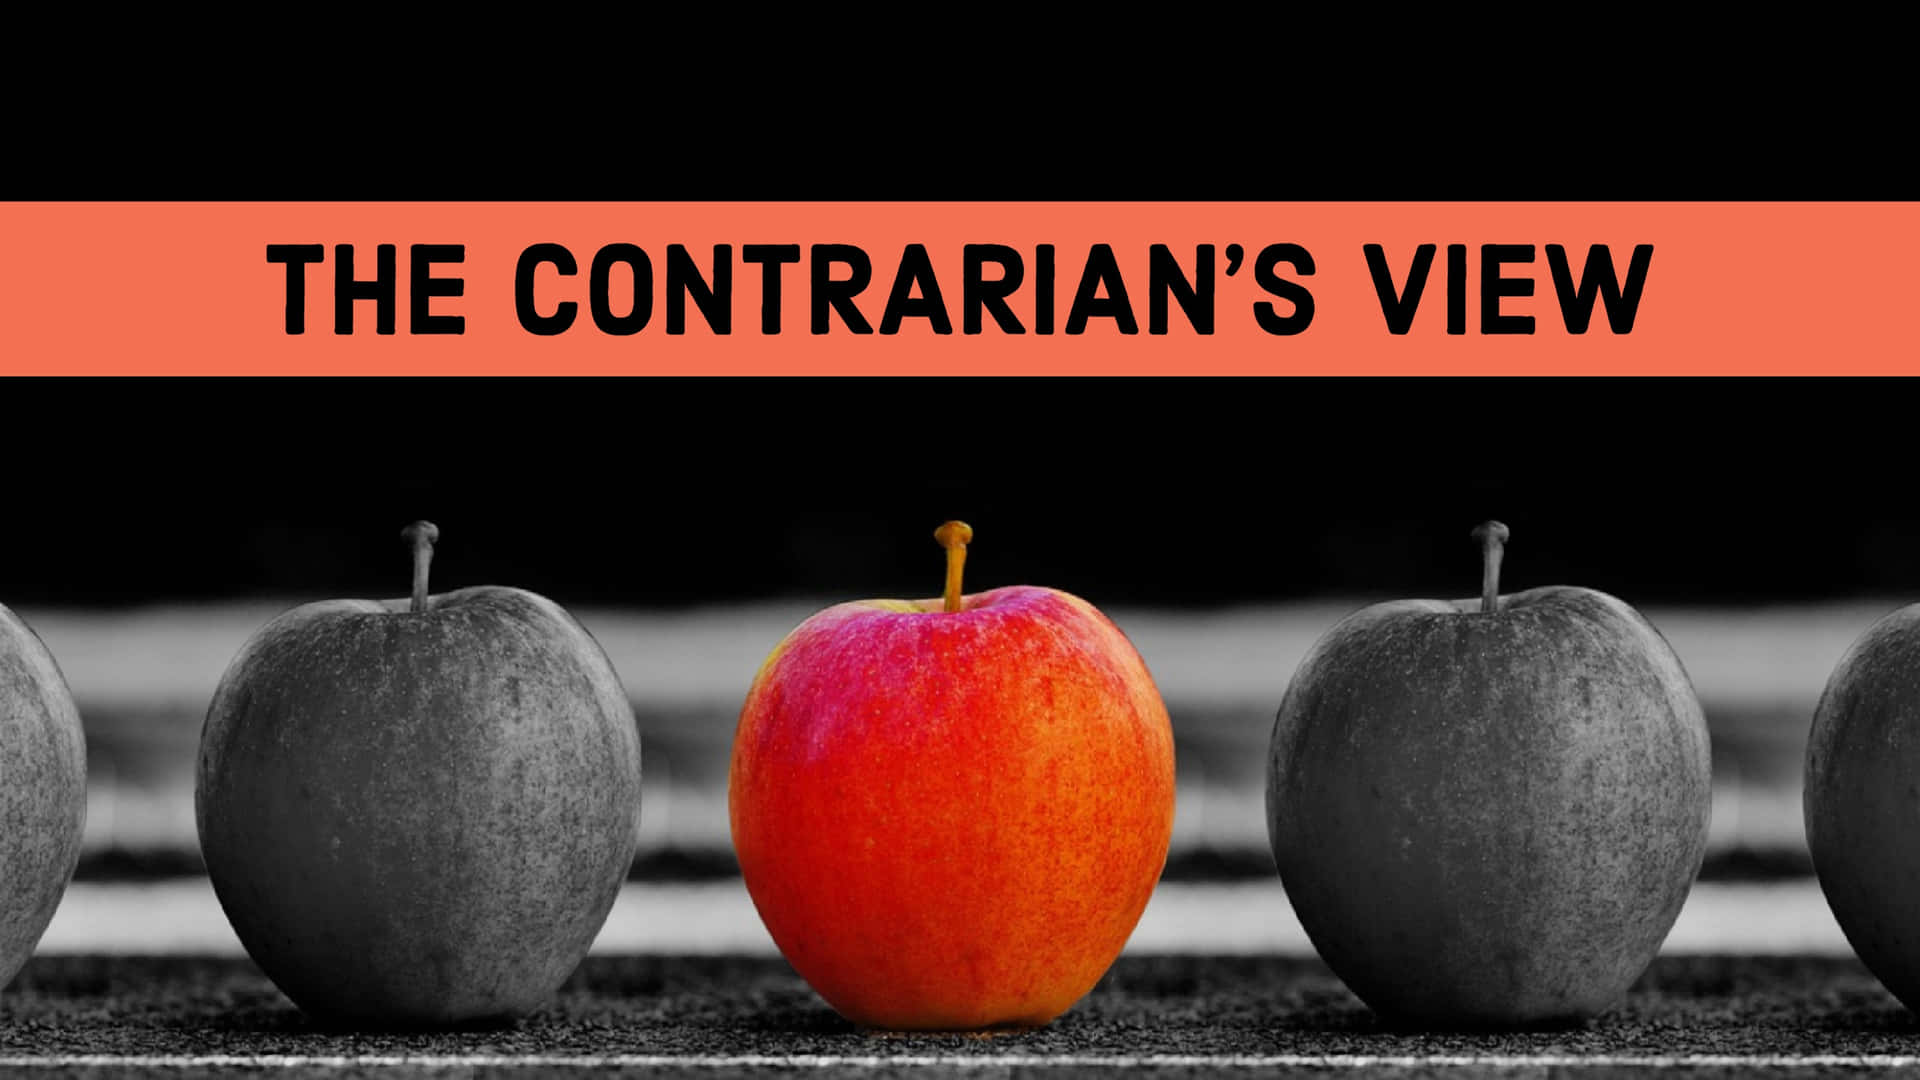 The Contrarian View Poster Wallpaper